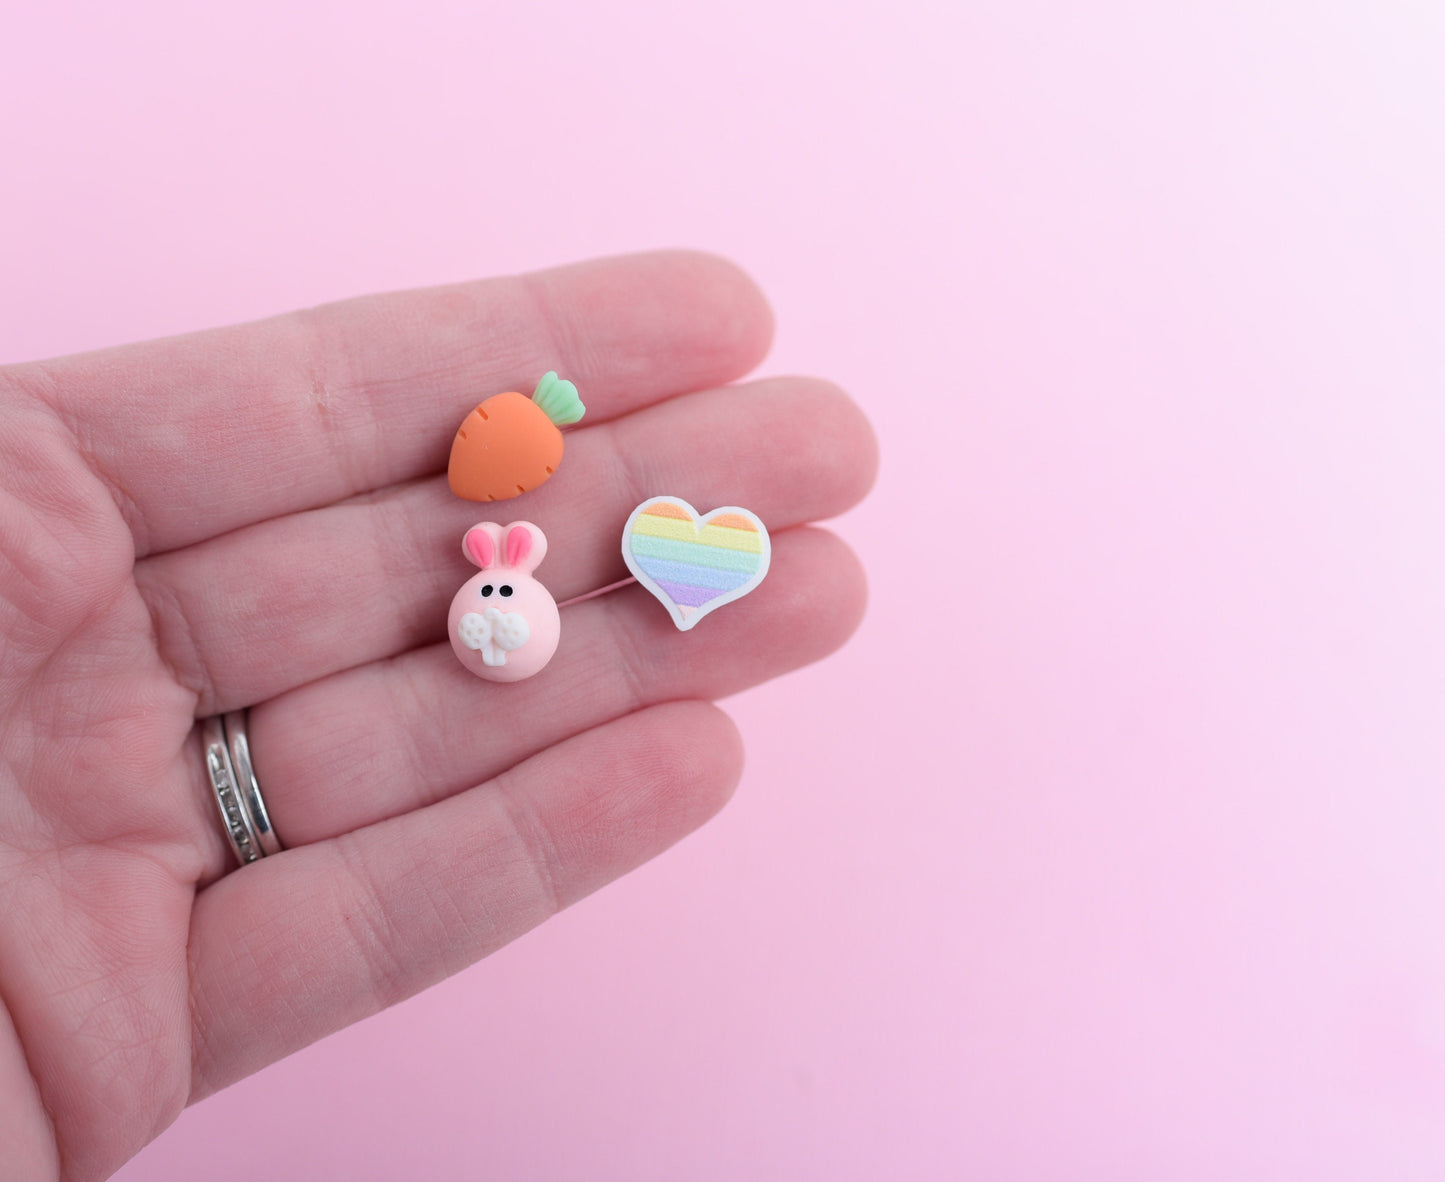 Bunny, Heart, and Carrot Earring Trio with Titanium Posts